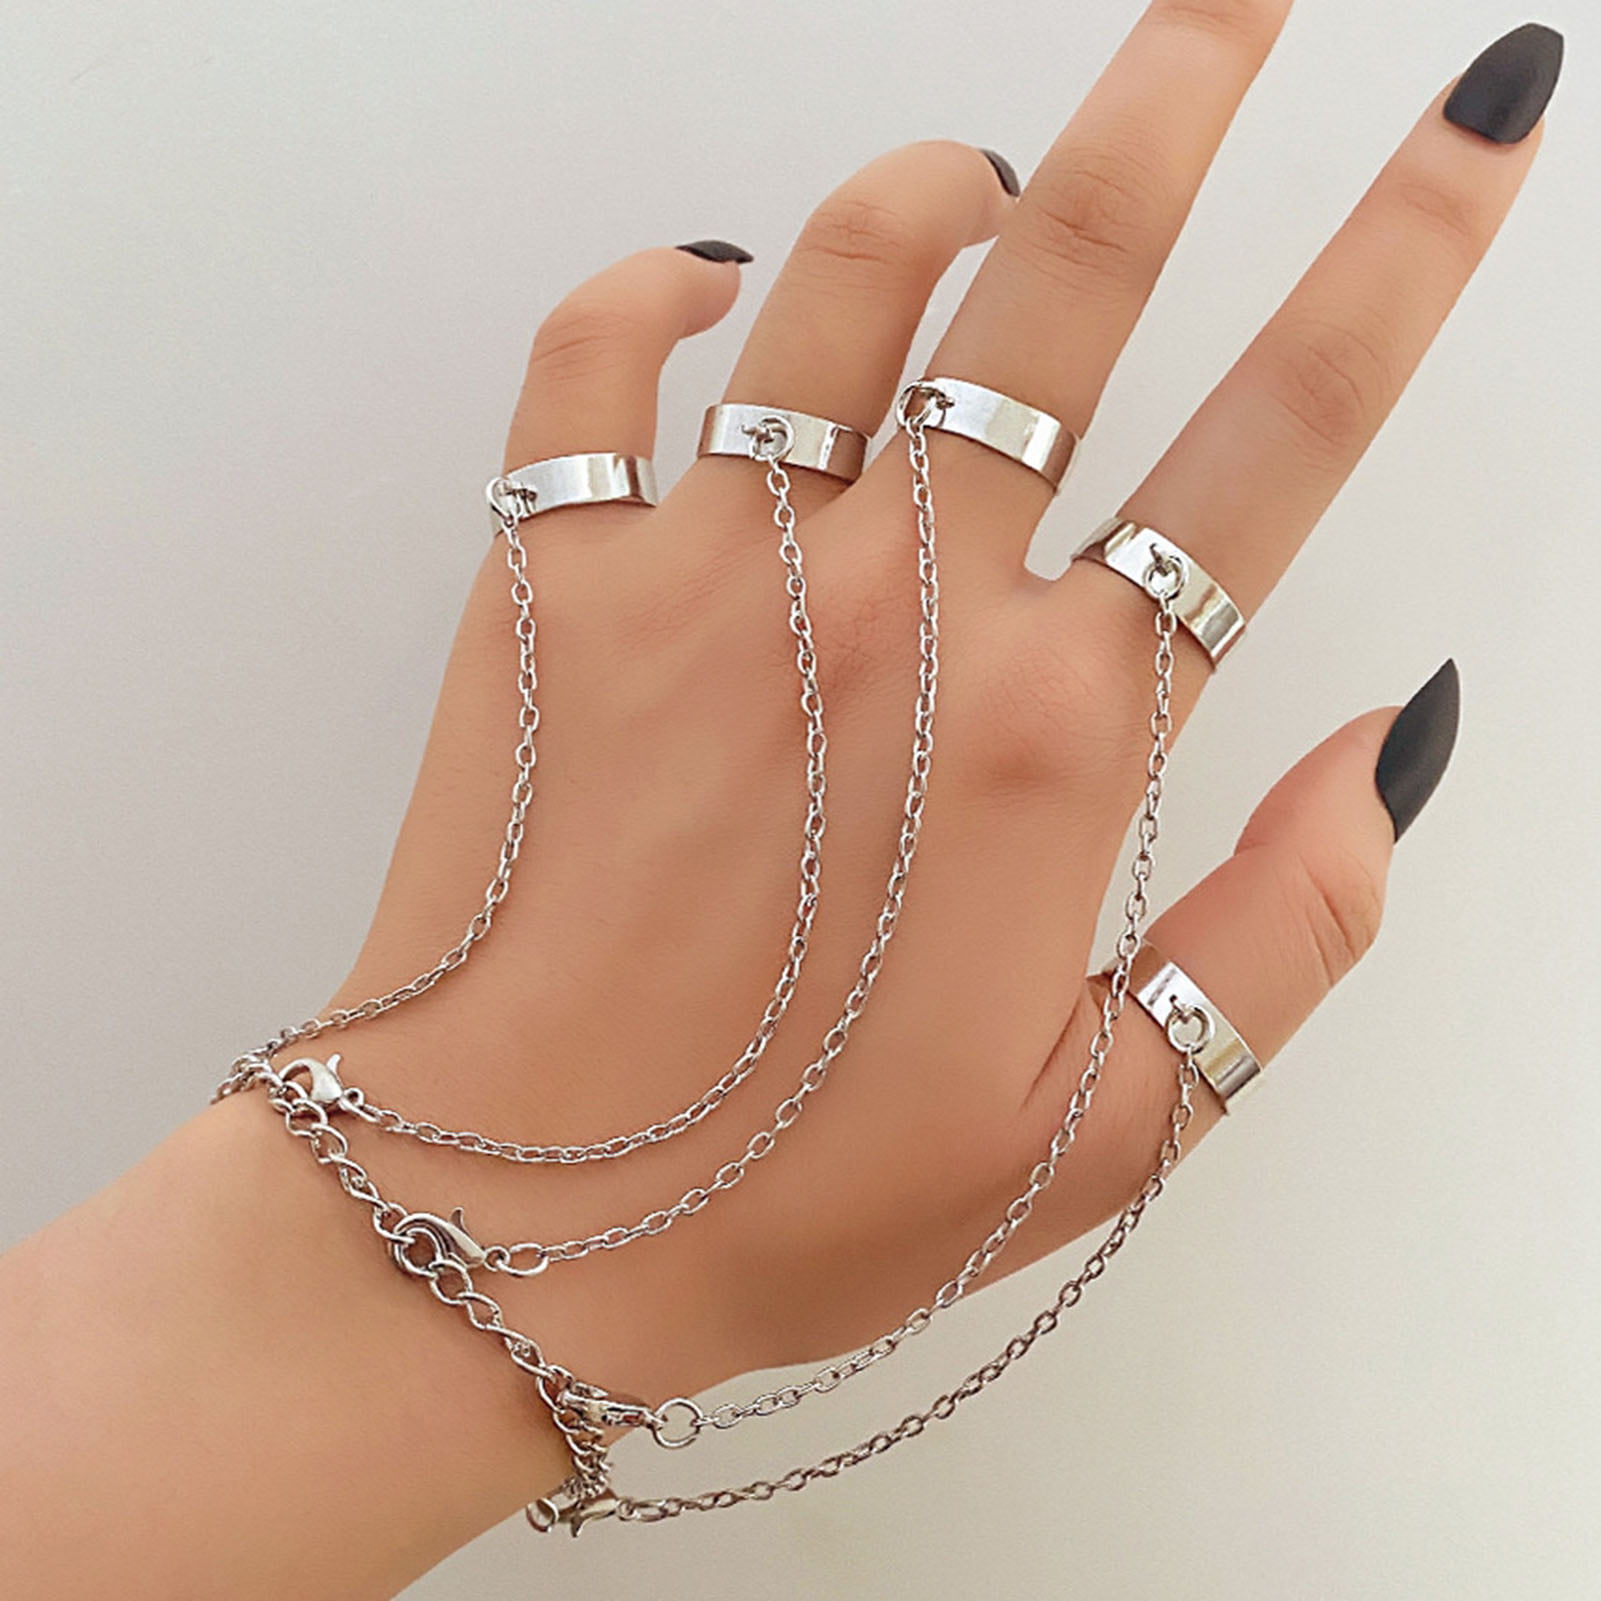 TRIPLE BEAD HAND-CHAIN- Sterling Silver - The Littl A$119.99 A$119.99  Bridal (Jewellery Only) Classic Round Bead Hand-Chain